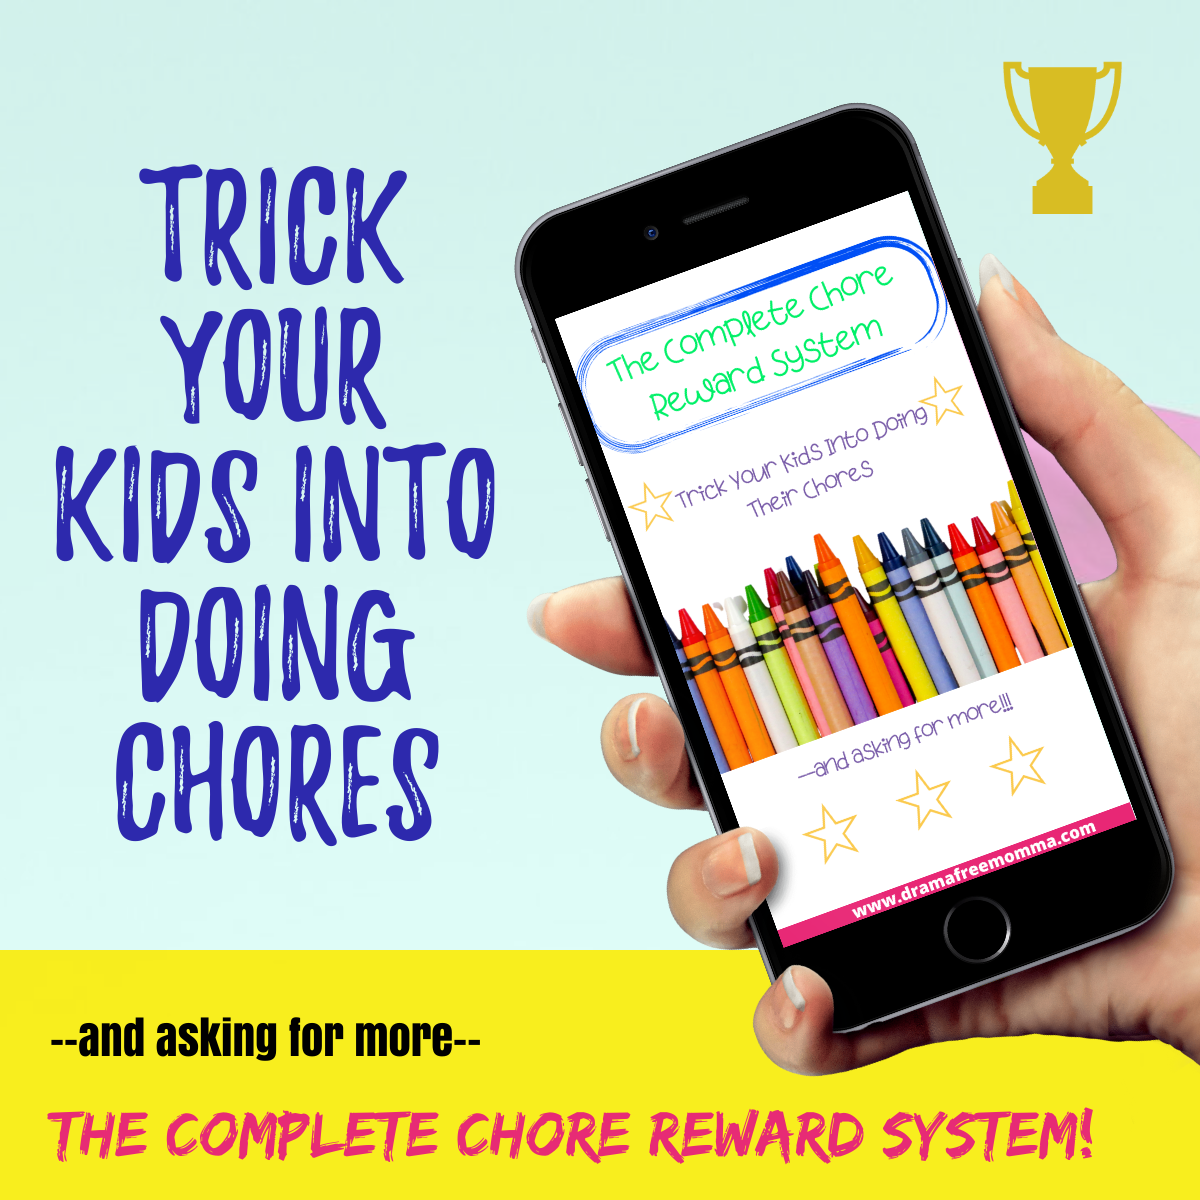 free printable chore chart for kids, free printable chore reward chart for kids, chores for kids, free printables, age appropriate chores, chore list template, chore rewards for kids, chore rewards template, chores for kids, Complete chore reward system, daily chore checklist for kids, how to get kids to do chores